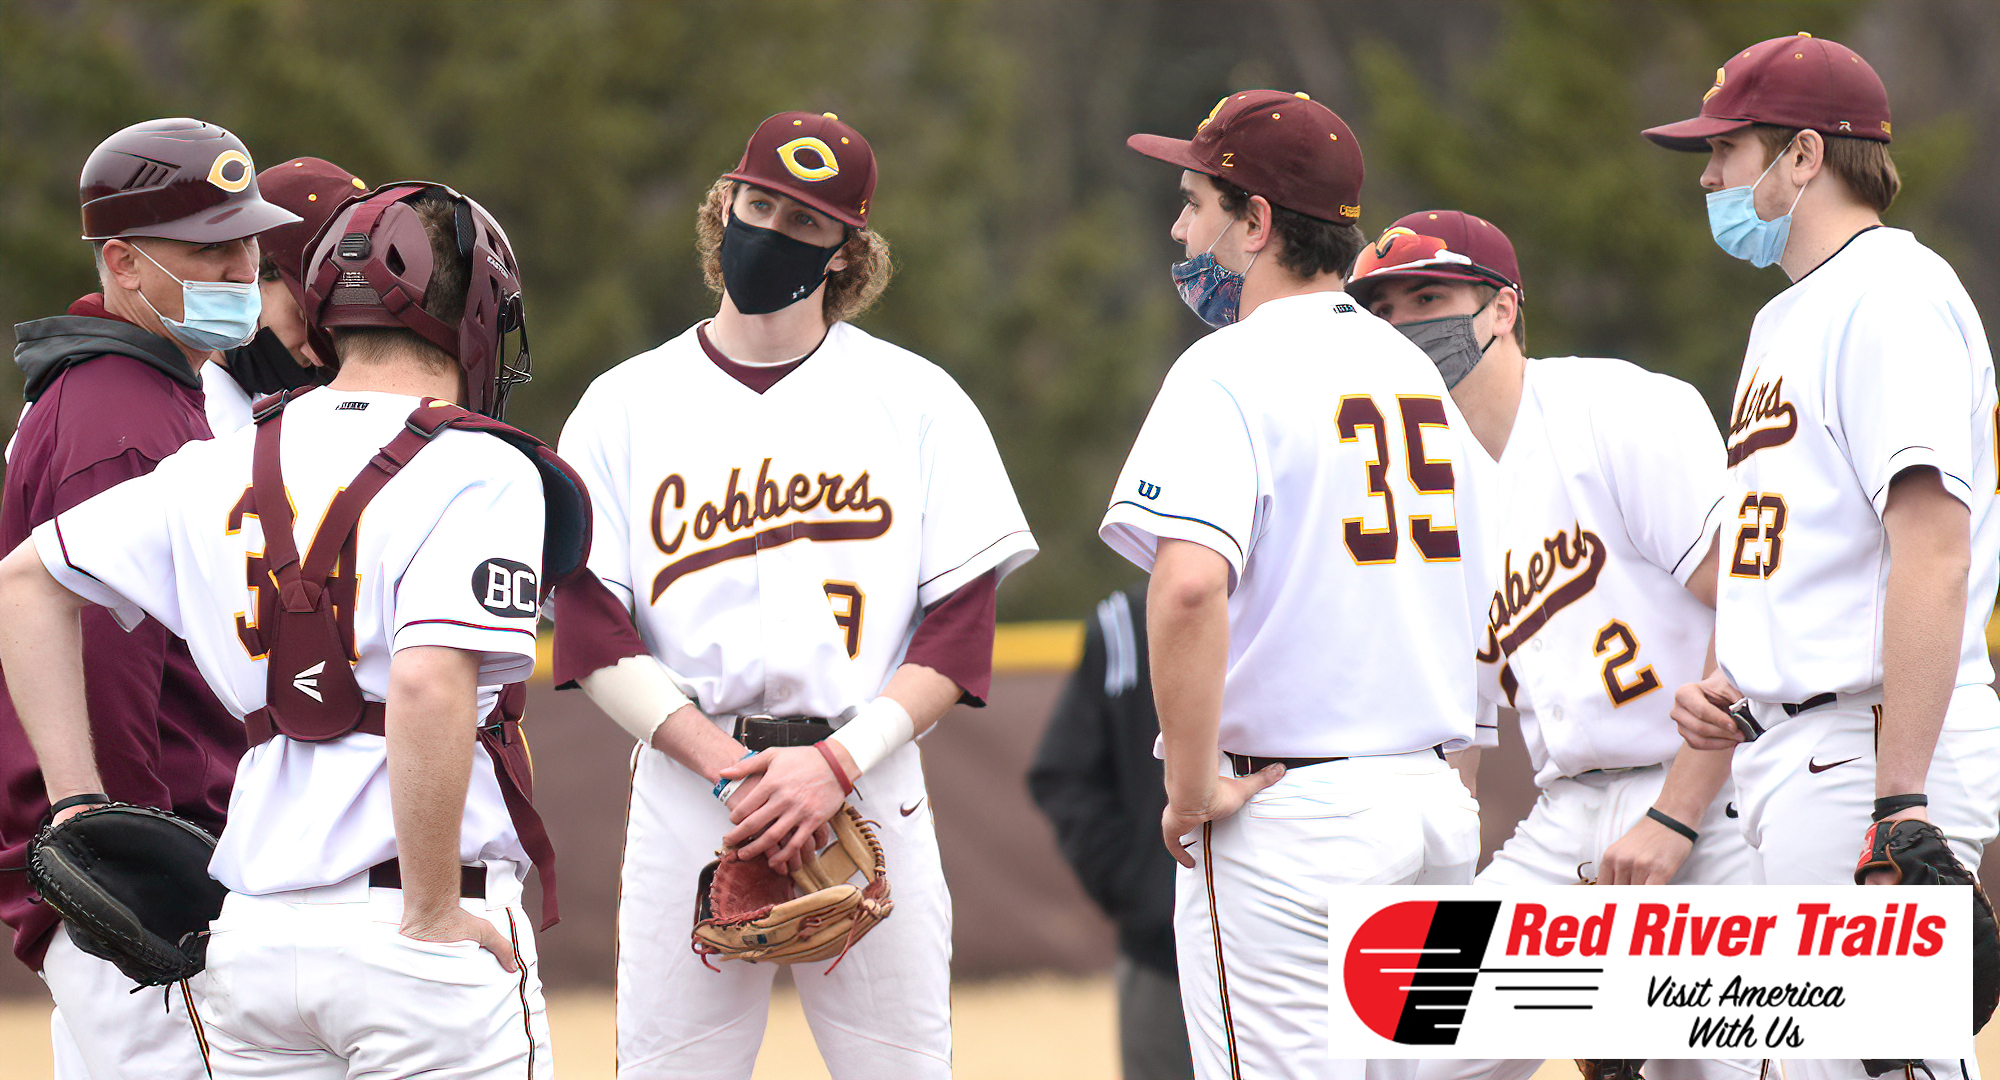 Concordia had their season come to a close with a 6-1 loss in the MIAC Playoff Play-In game at St. Mary's.